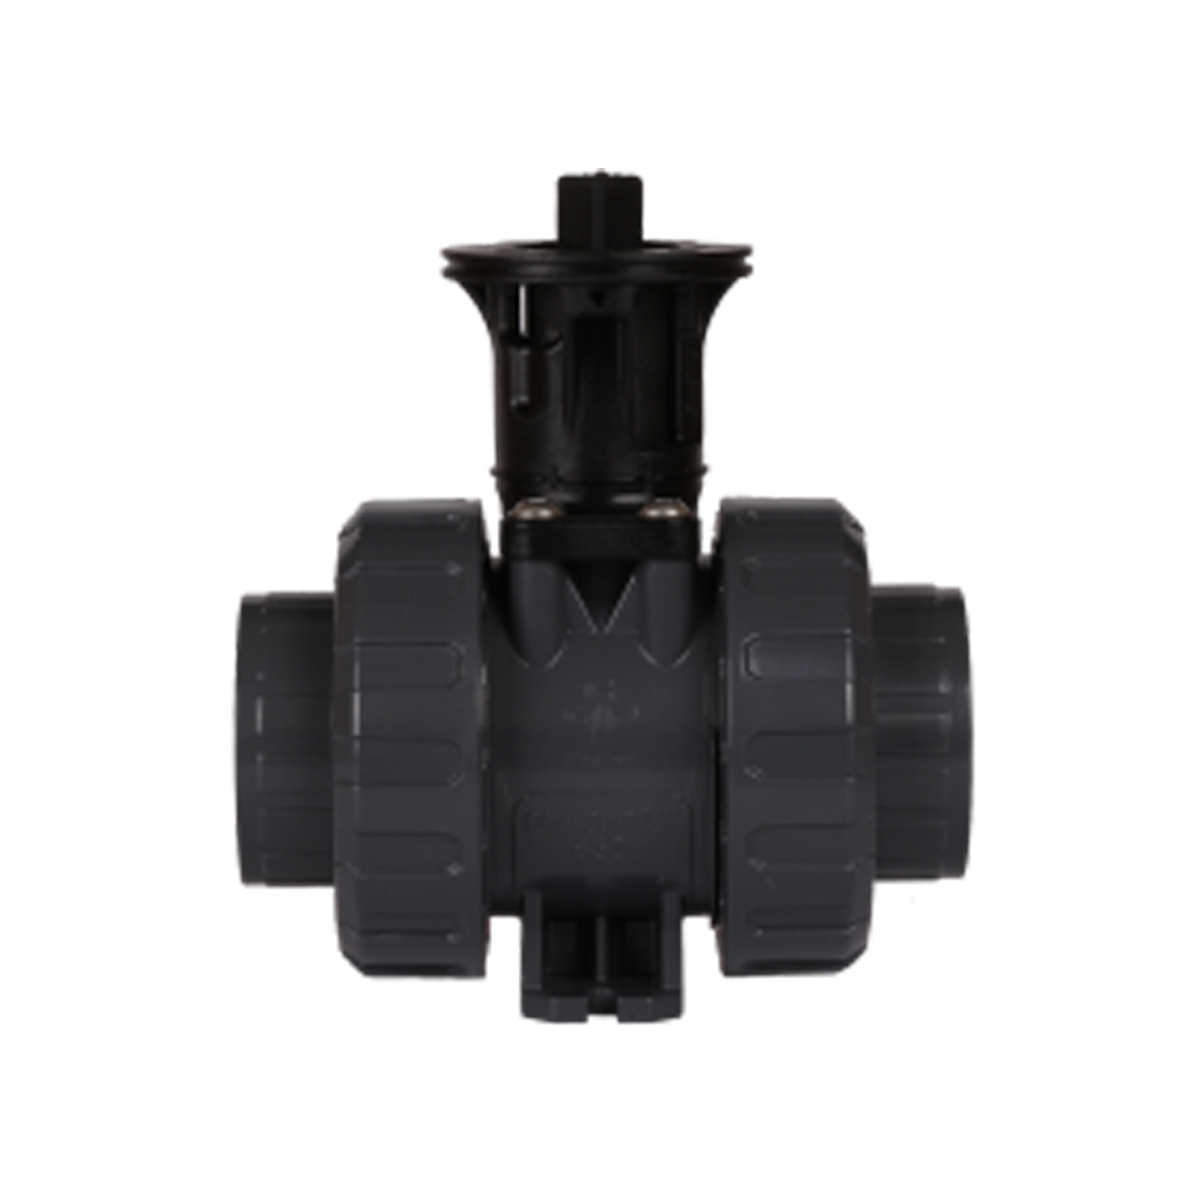 Ball Valve M1 2W DN10 PVC grey PVCu solvent socket ends d16 metric PN16 EPDM PTFE adapterset F04 single packed Ball Valve M1 2W DN10 PVC grey PVCu solvent socket ends d16 metric PN16 EPDM PTFE adapterset F04 single packed